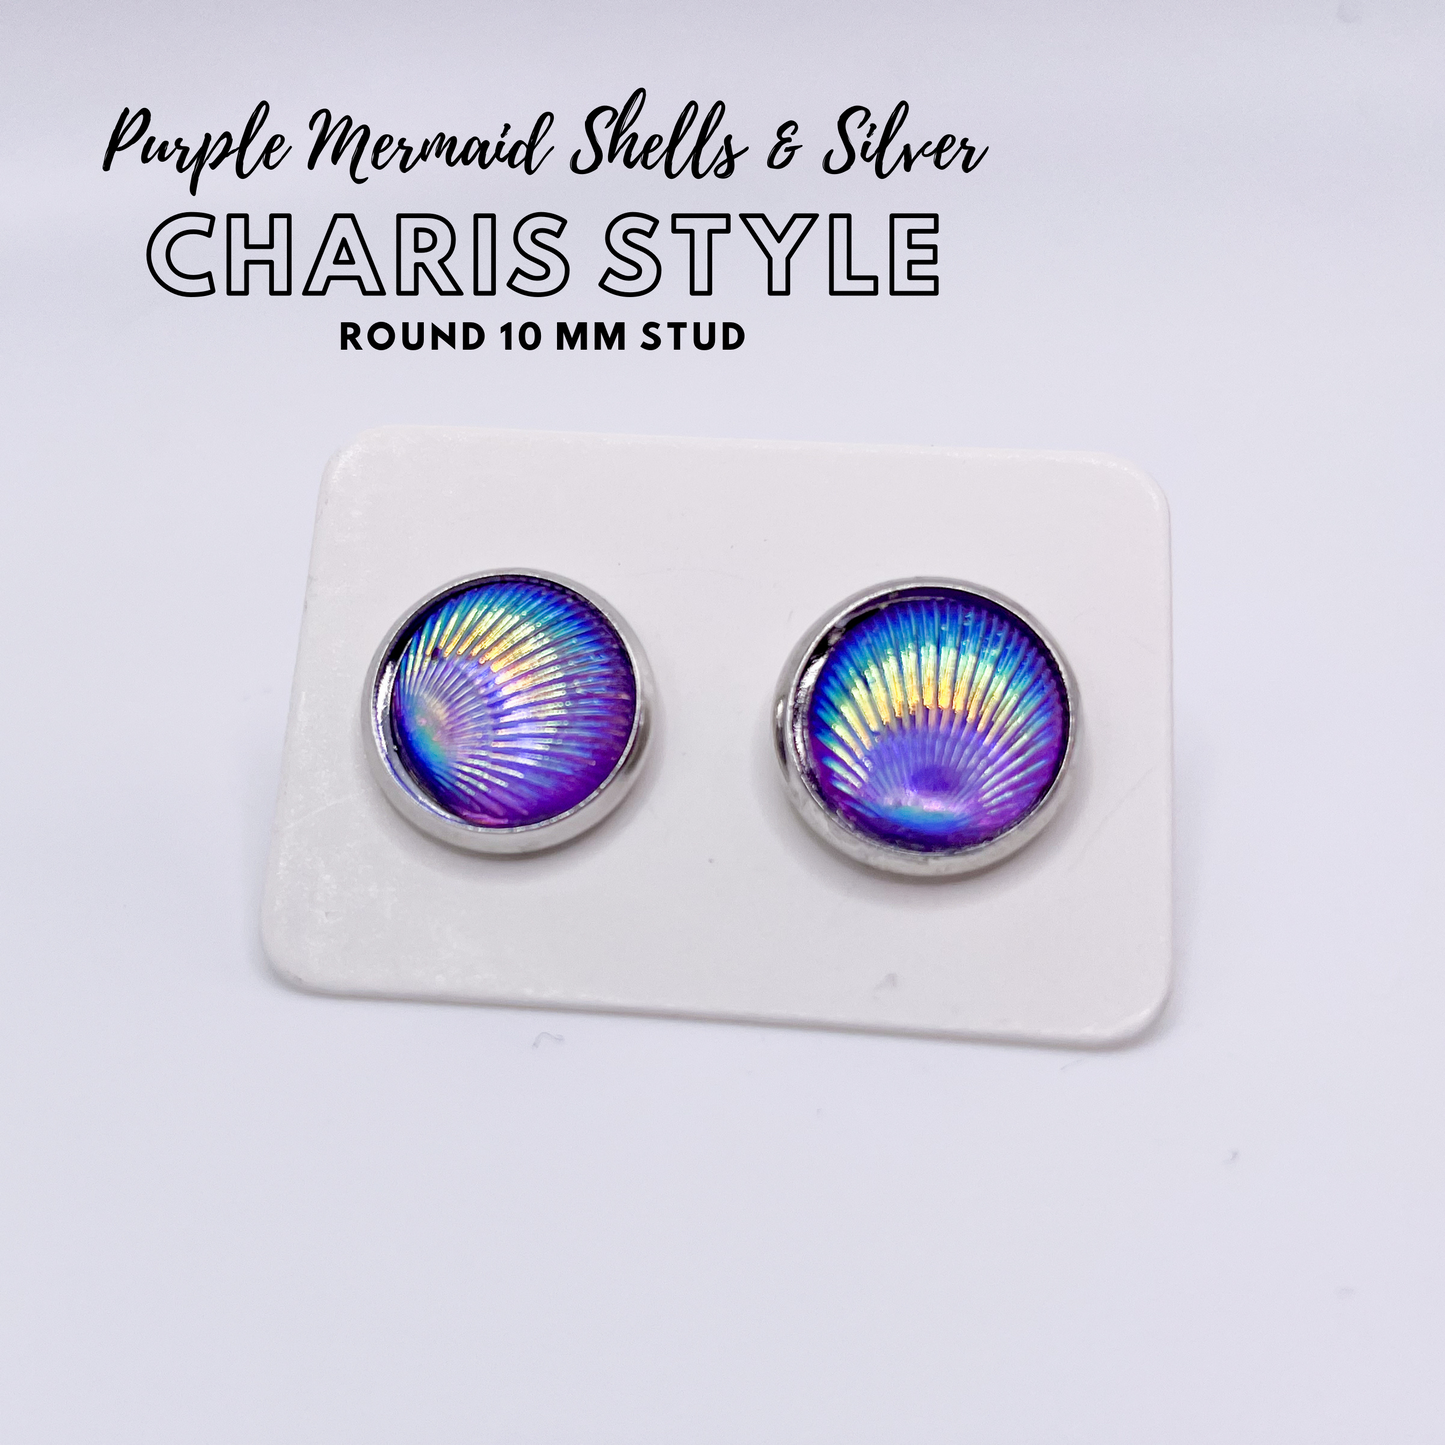 Charis Style - 10 MM Studs - Purple Mermaid Shells and Silver